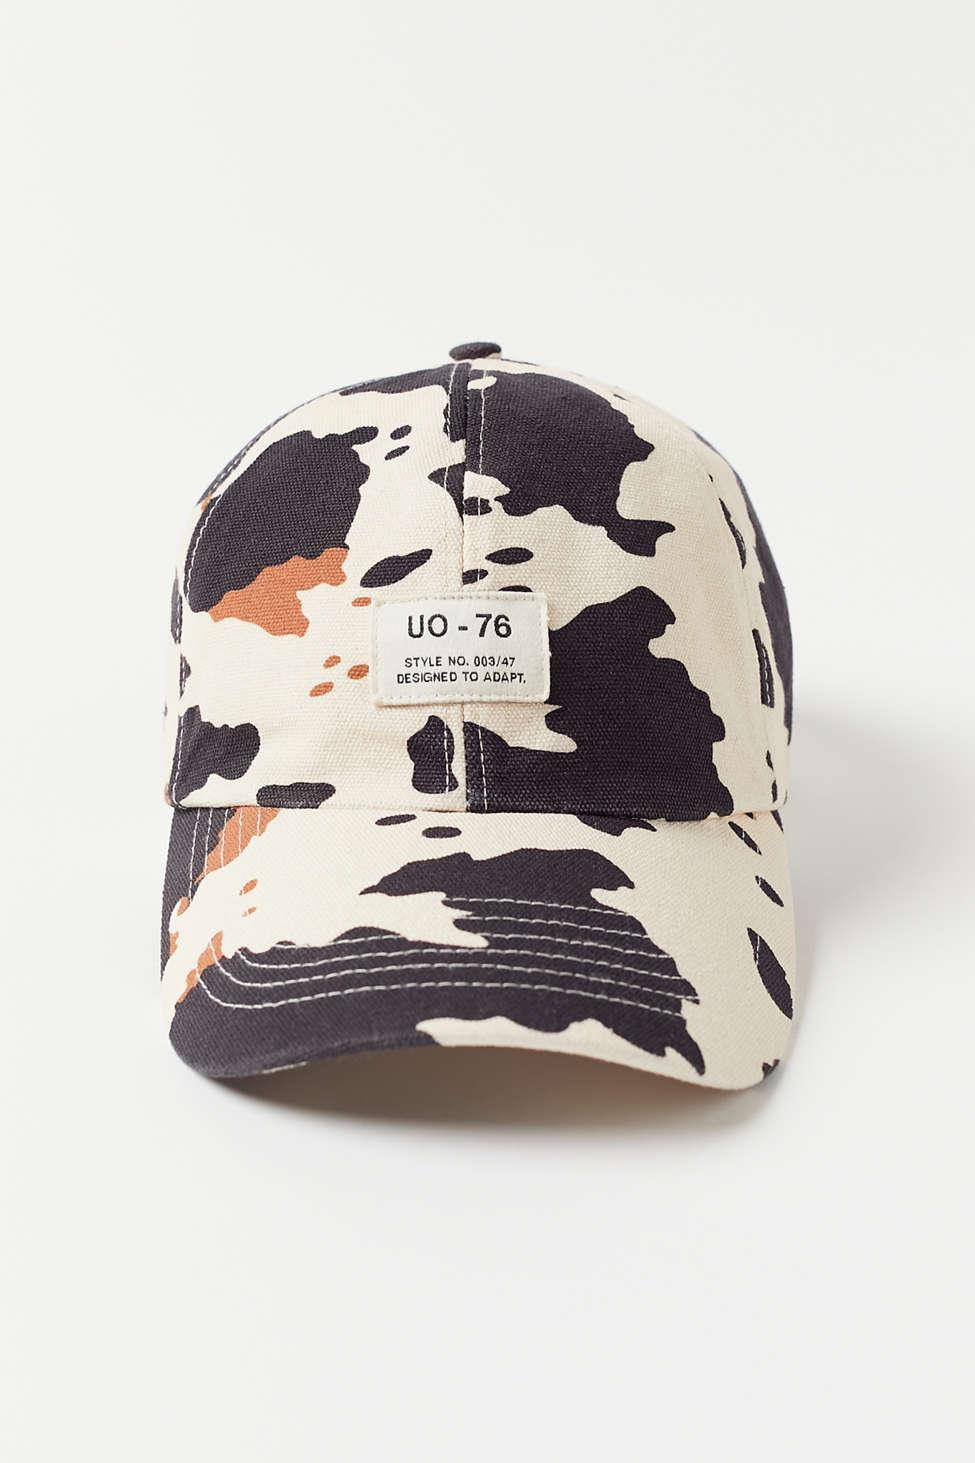 Urban Outfitters Canvas Uo Cow Print Baseball Hat in Black + White (Black)  - Lyst